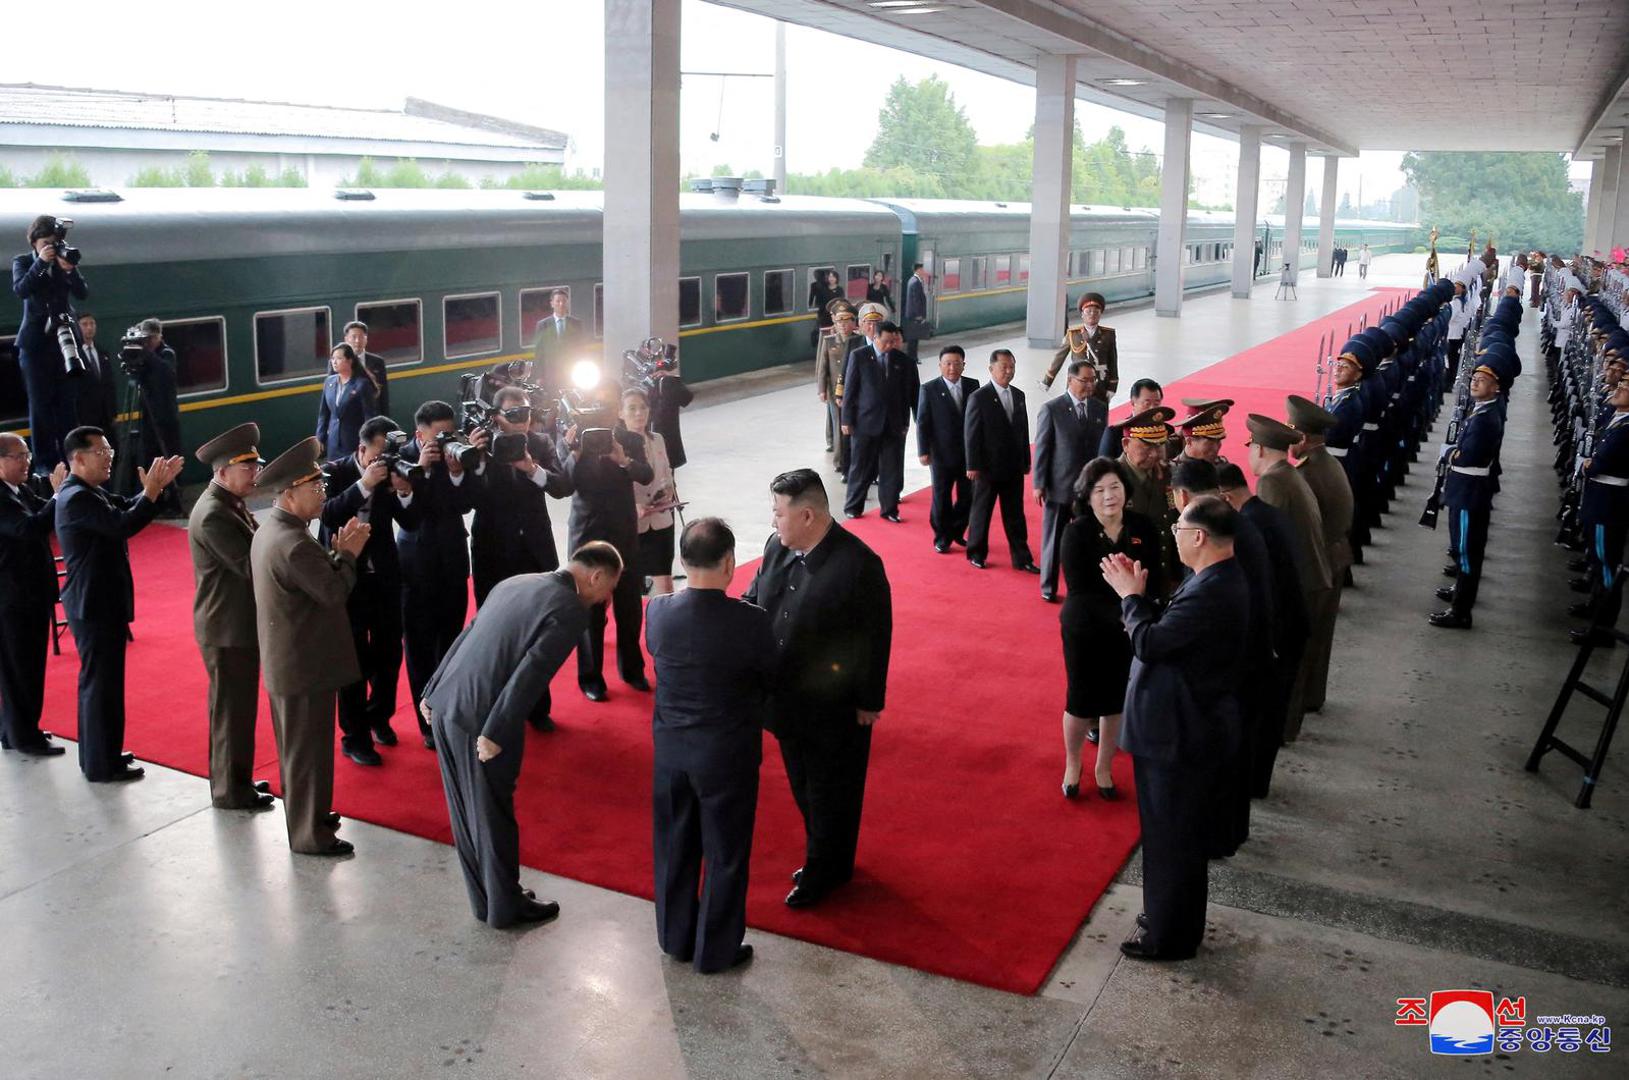 North Korean leader Kim Jong Un, accompanied by Foreign Minister Choe Son Hui, Ri Pyong Chol, Vice Chairman of the ruling Workers' Party's Central Military Commission, Pak Jong Chon, the new head of the party's military-political leadership, Pak Thae Song, party secretary and Chairman of a national space science and technology committee, Jo Chun Ryong, Director of the Munitions Industry Department, and Pak Hun, Vice Premier of the cabinet, depart Pyongyang, North Korea, to visit Russia, September 10, 2023, in this image released by North Korea's Korean Central News Agency on September 12, 2023.   KCNA via REUTERS    ATTENTION EDITORS - THIS IMAGE WAS PROVIDED BY A THIRD PARTY. REUTERS IS UNABLE TO INDEPENDENTLY VERIFY THIS IMAGE. NO THIRD PARTY SALES. SOUTH KOREA OUT. NO COMMERCIAL OR EDITORIAL SALES IN SOUTH KOREA. Photo: KCNA/REUTERS